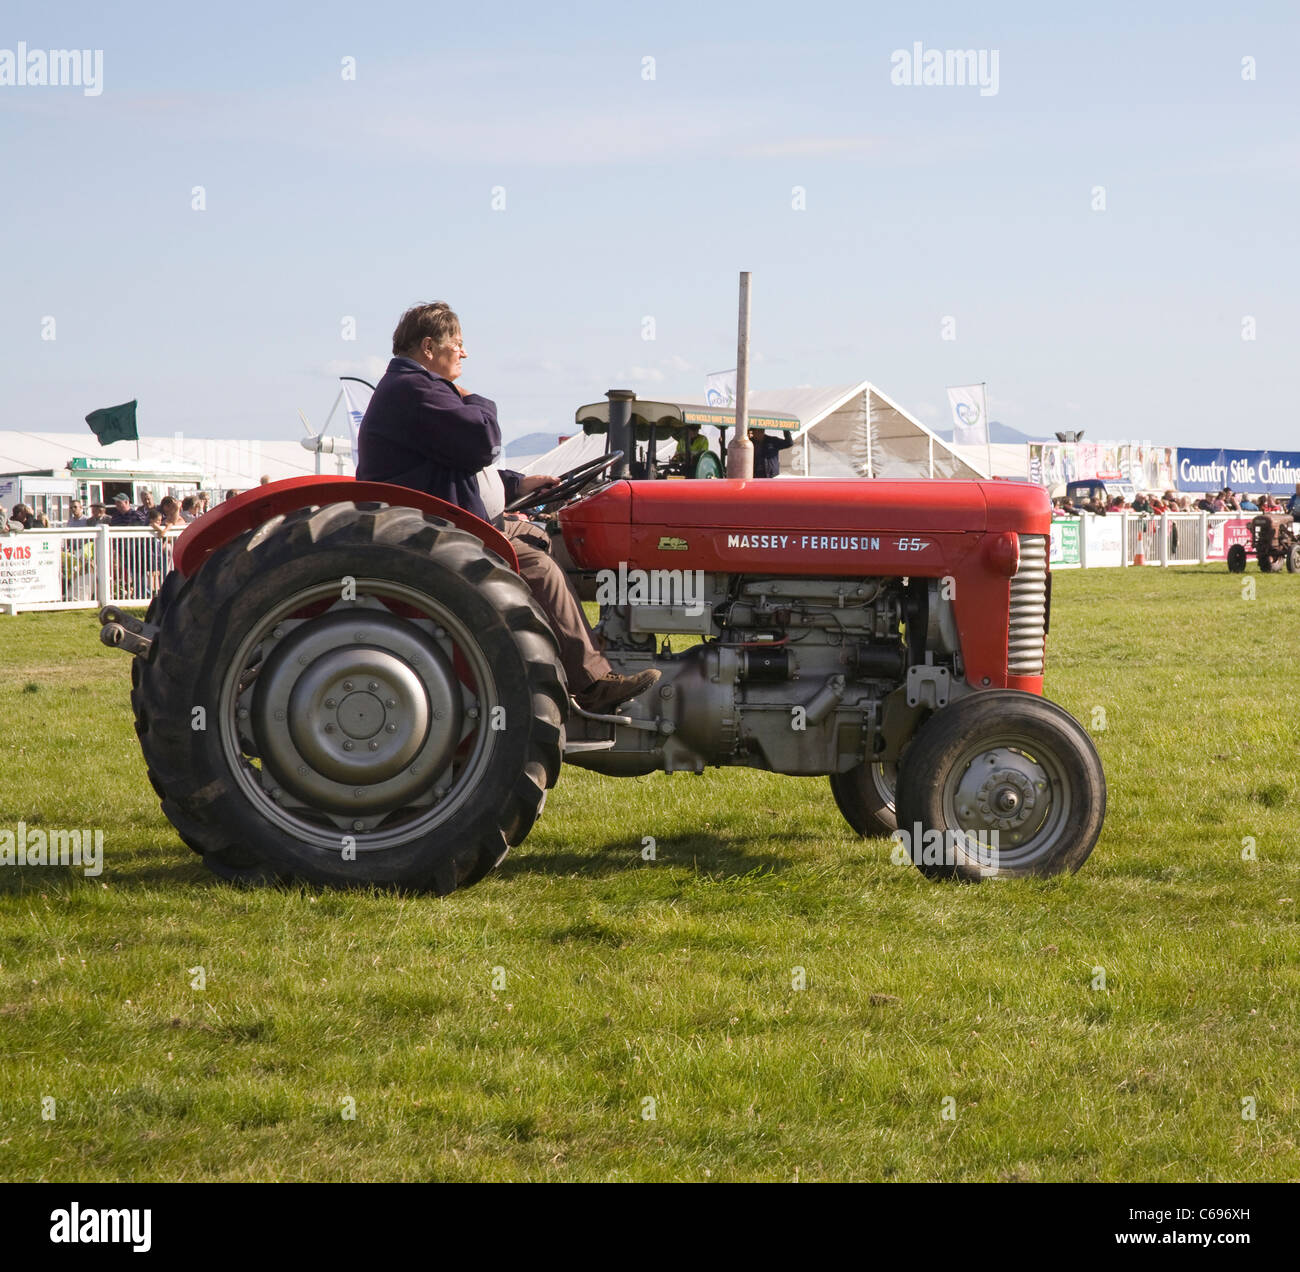 Vintage red Massey Ferguson 65 tractor an exhibit at agricultural show Stock Photo